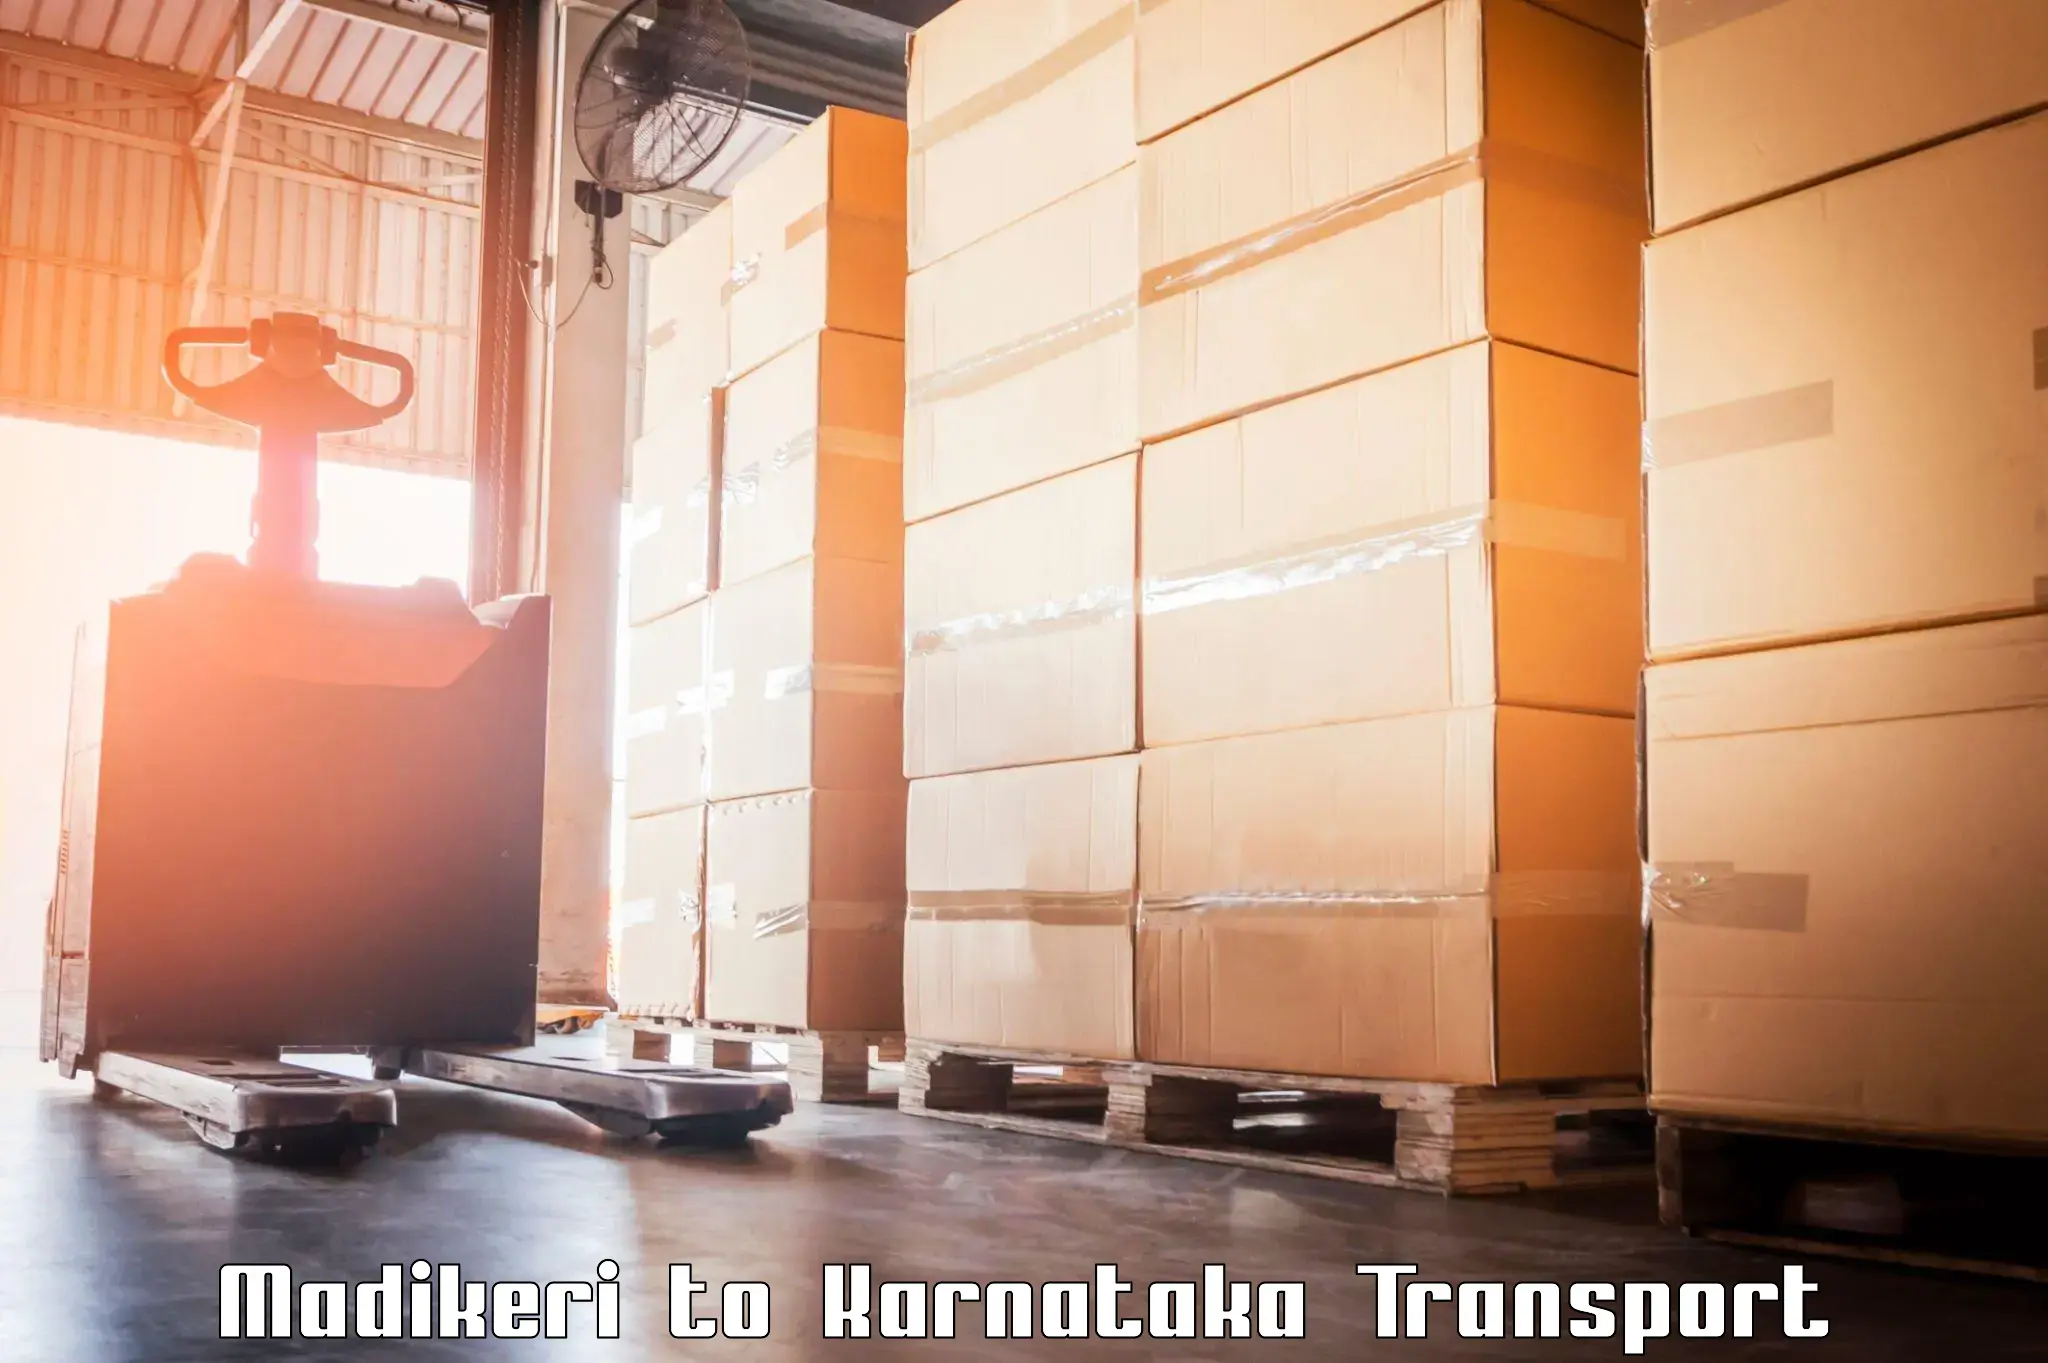 Truck transport companies in India in Madikeri to Chikkamagalur